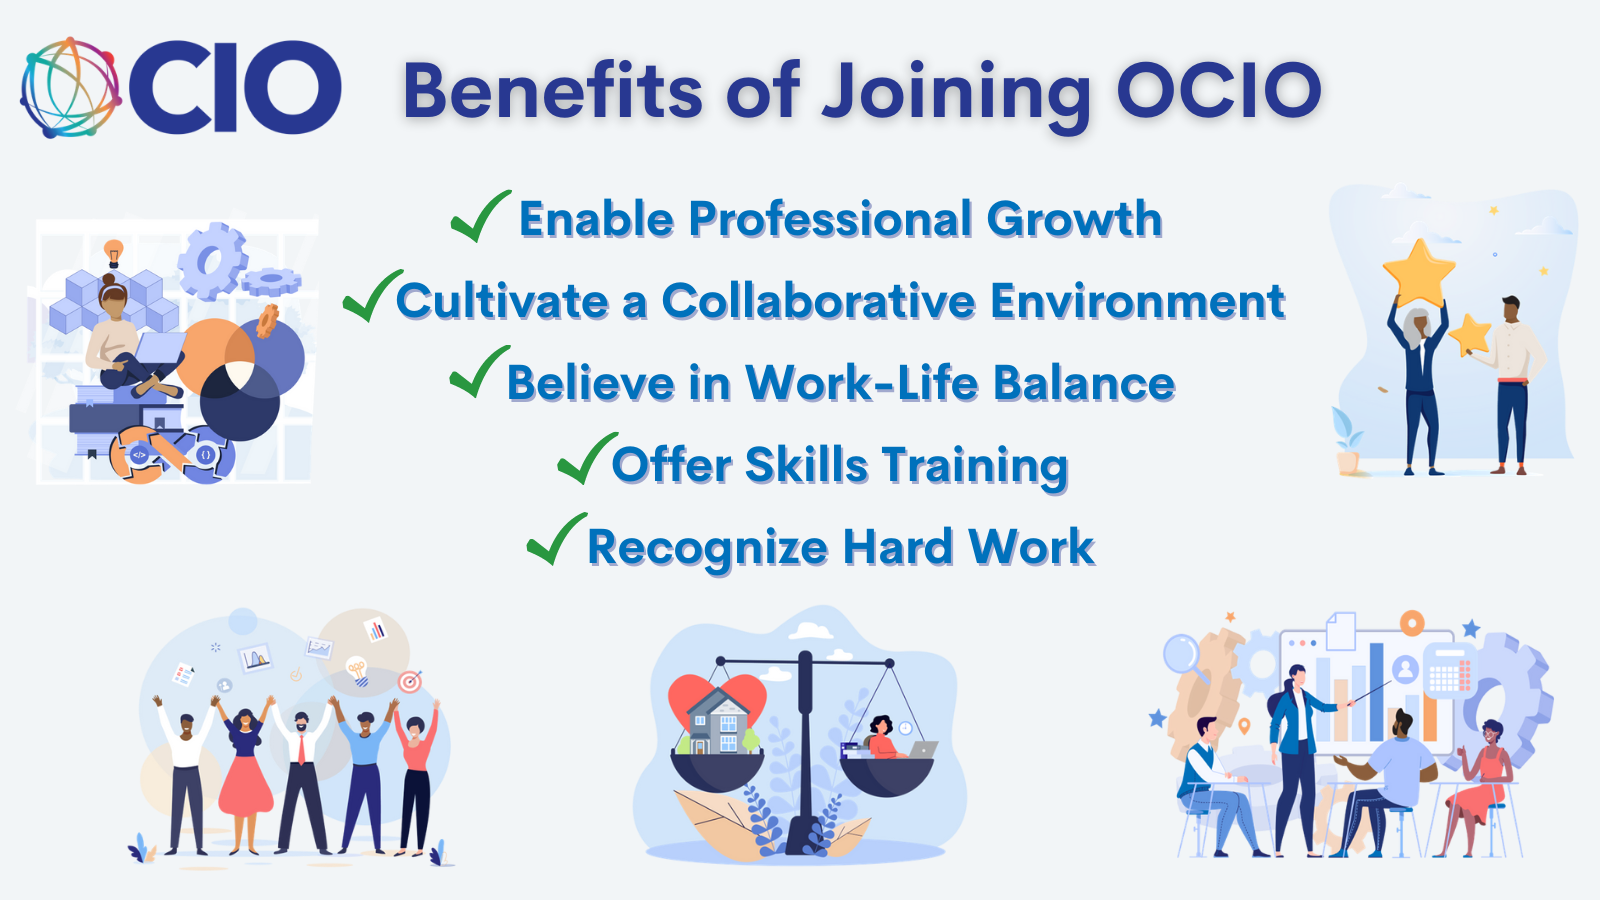 OCIO – Benefits of Joining OCIO. Enable professional growth. Cultivate a collaborative environment. Believe in work-life balance. Offer skills training. Recognize hard work.